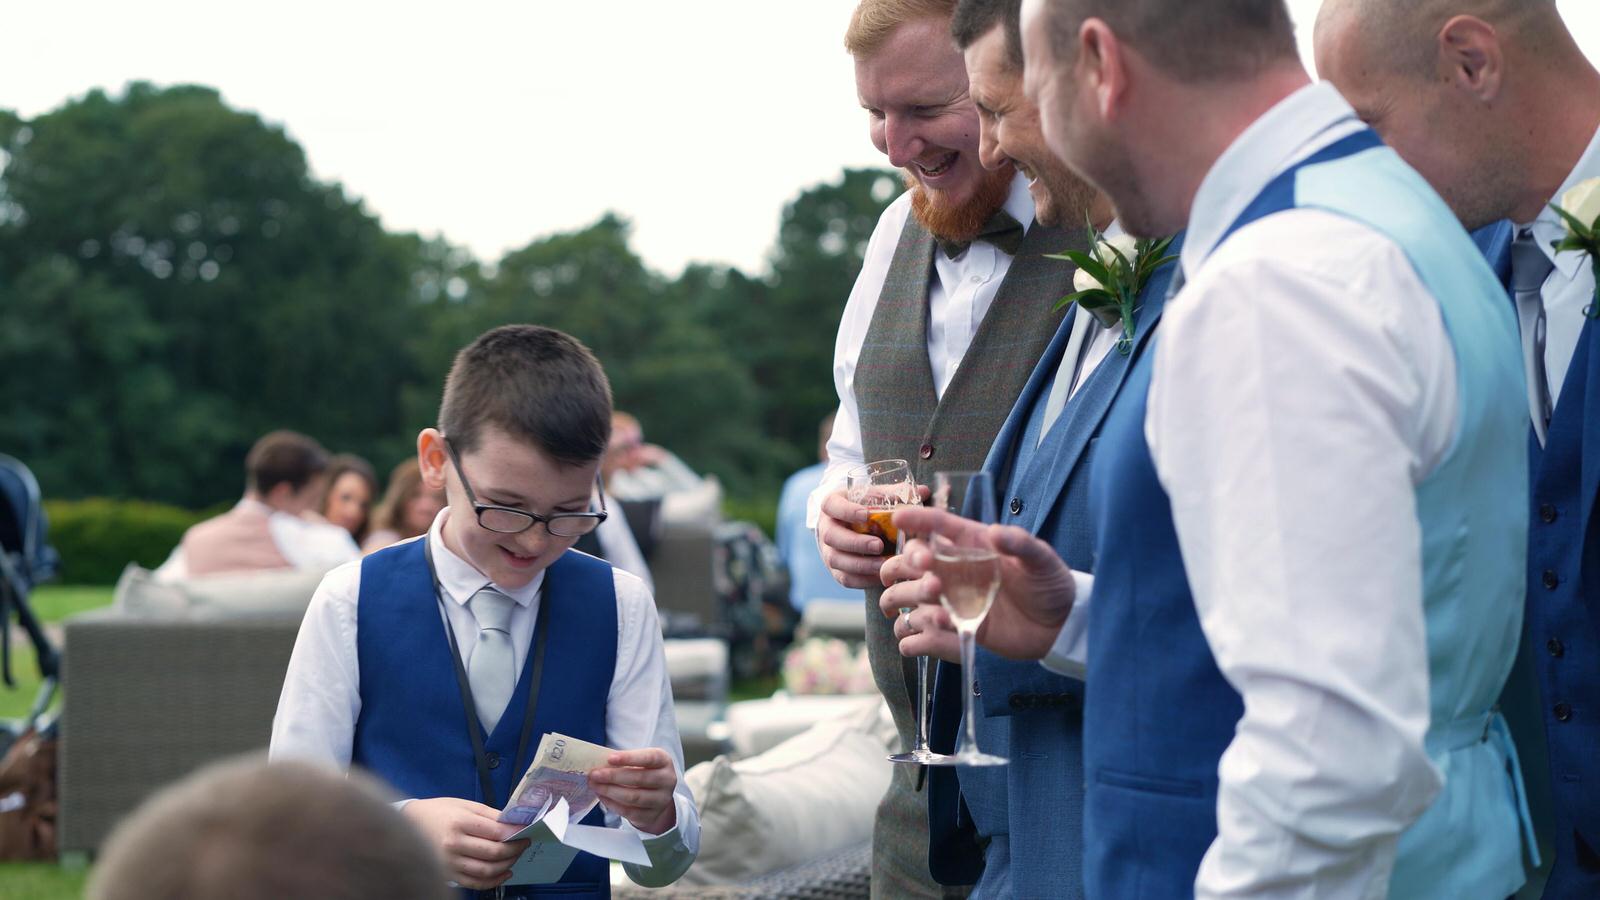 grooms son smiles at being given wedding money